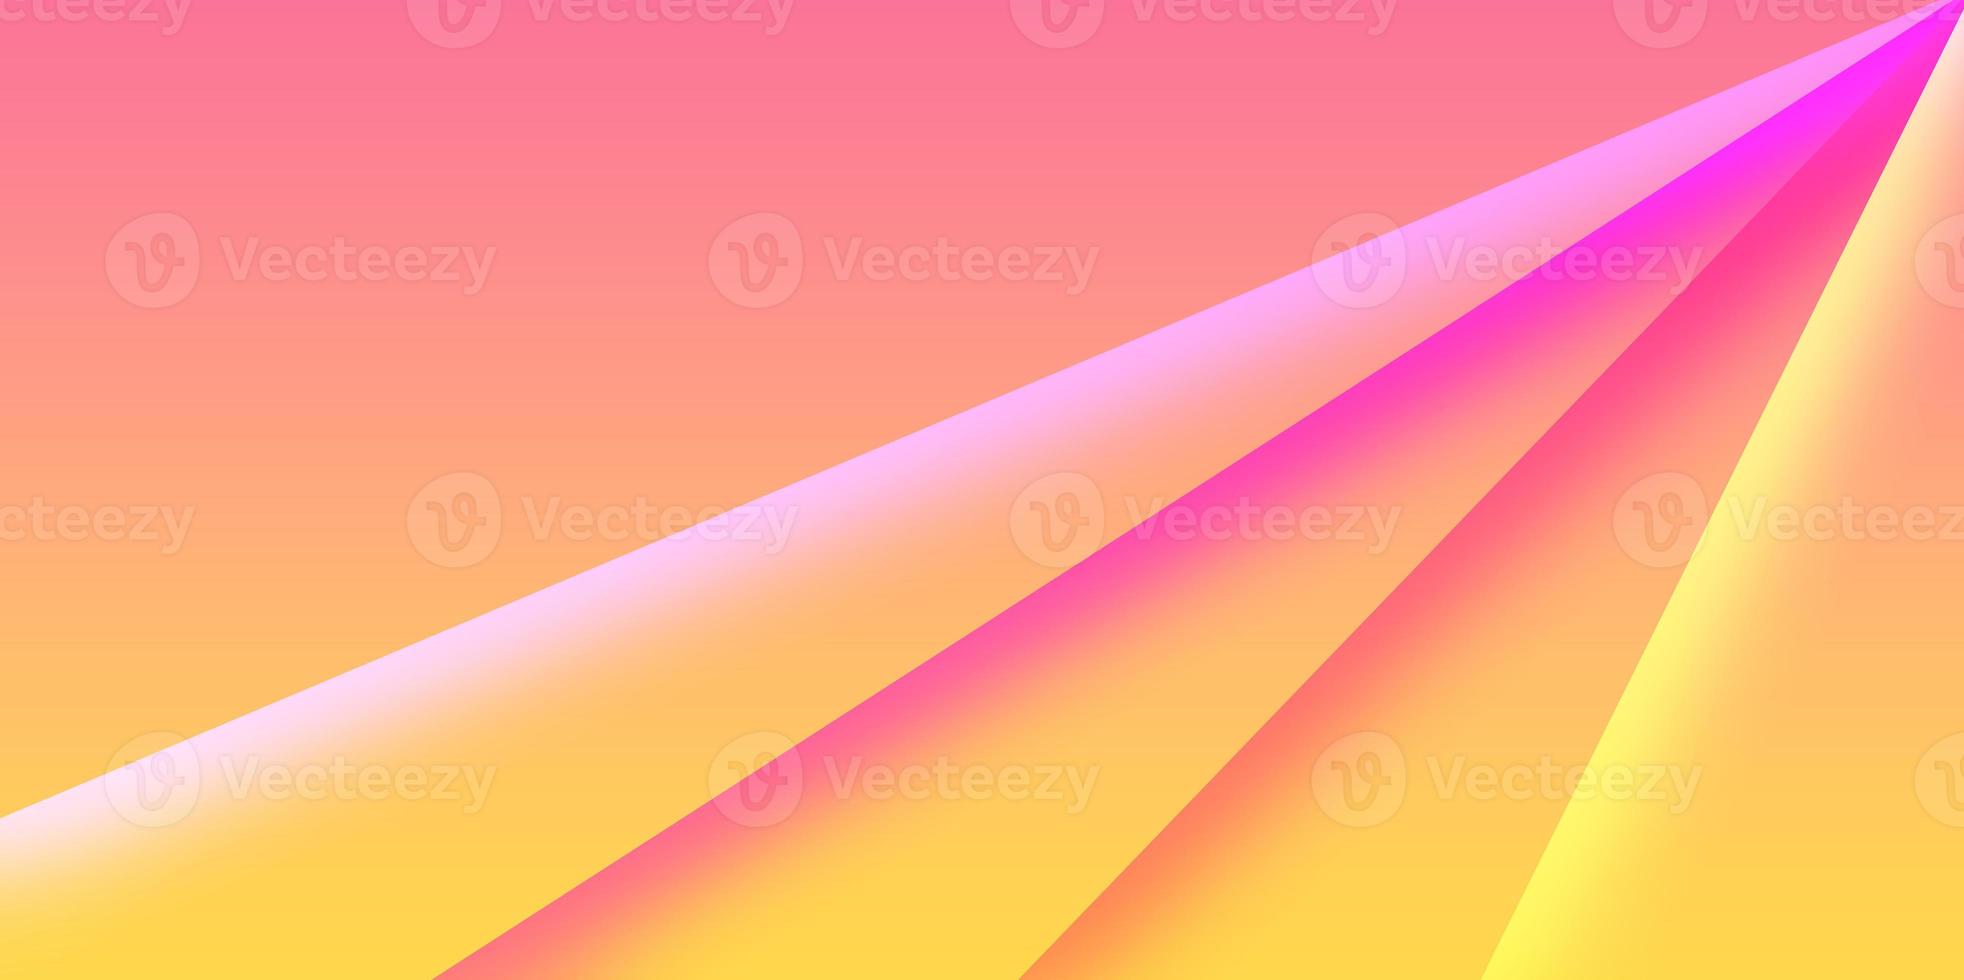 Light pink abstract background with blurred lines, pastel banner photo